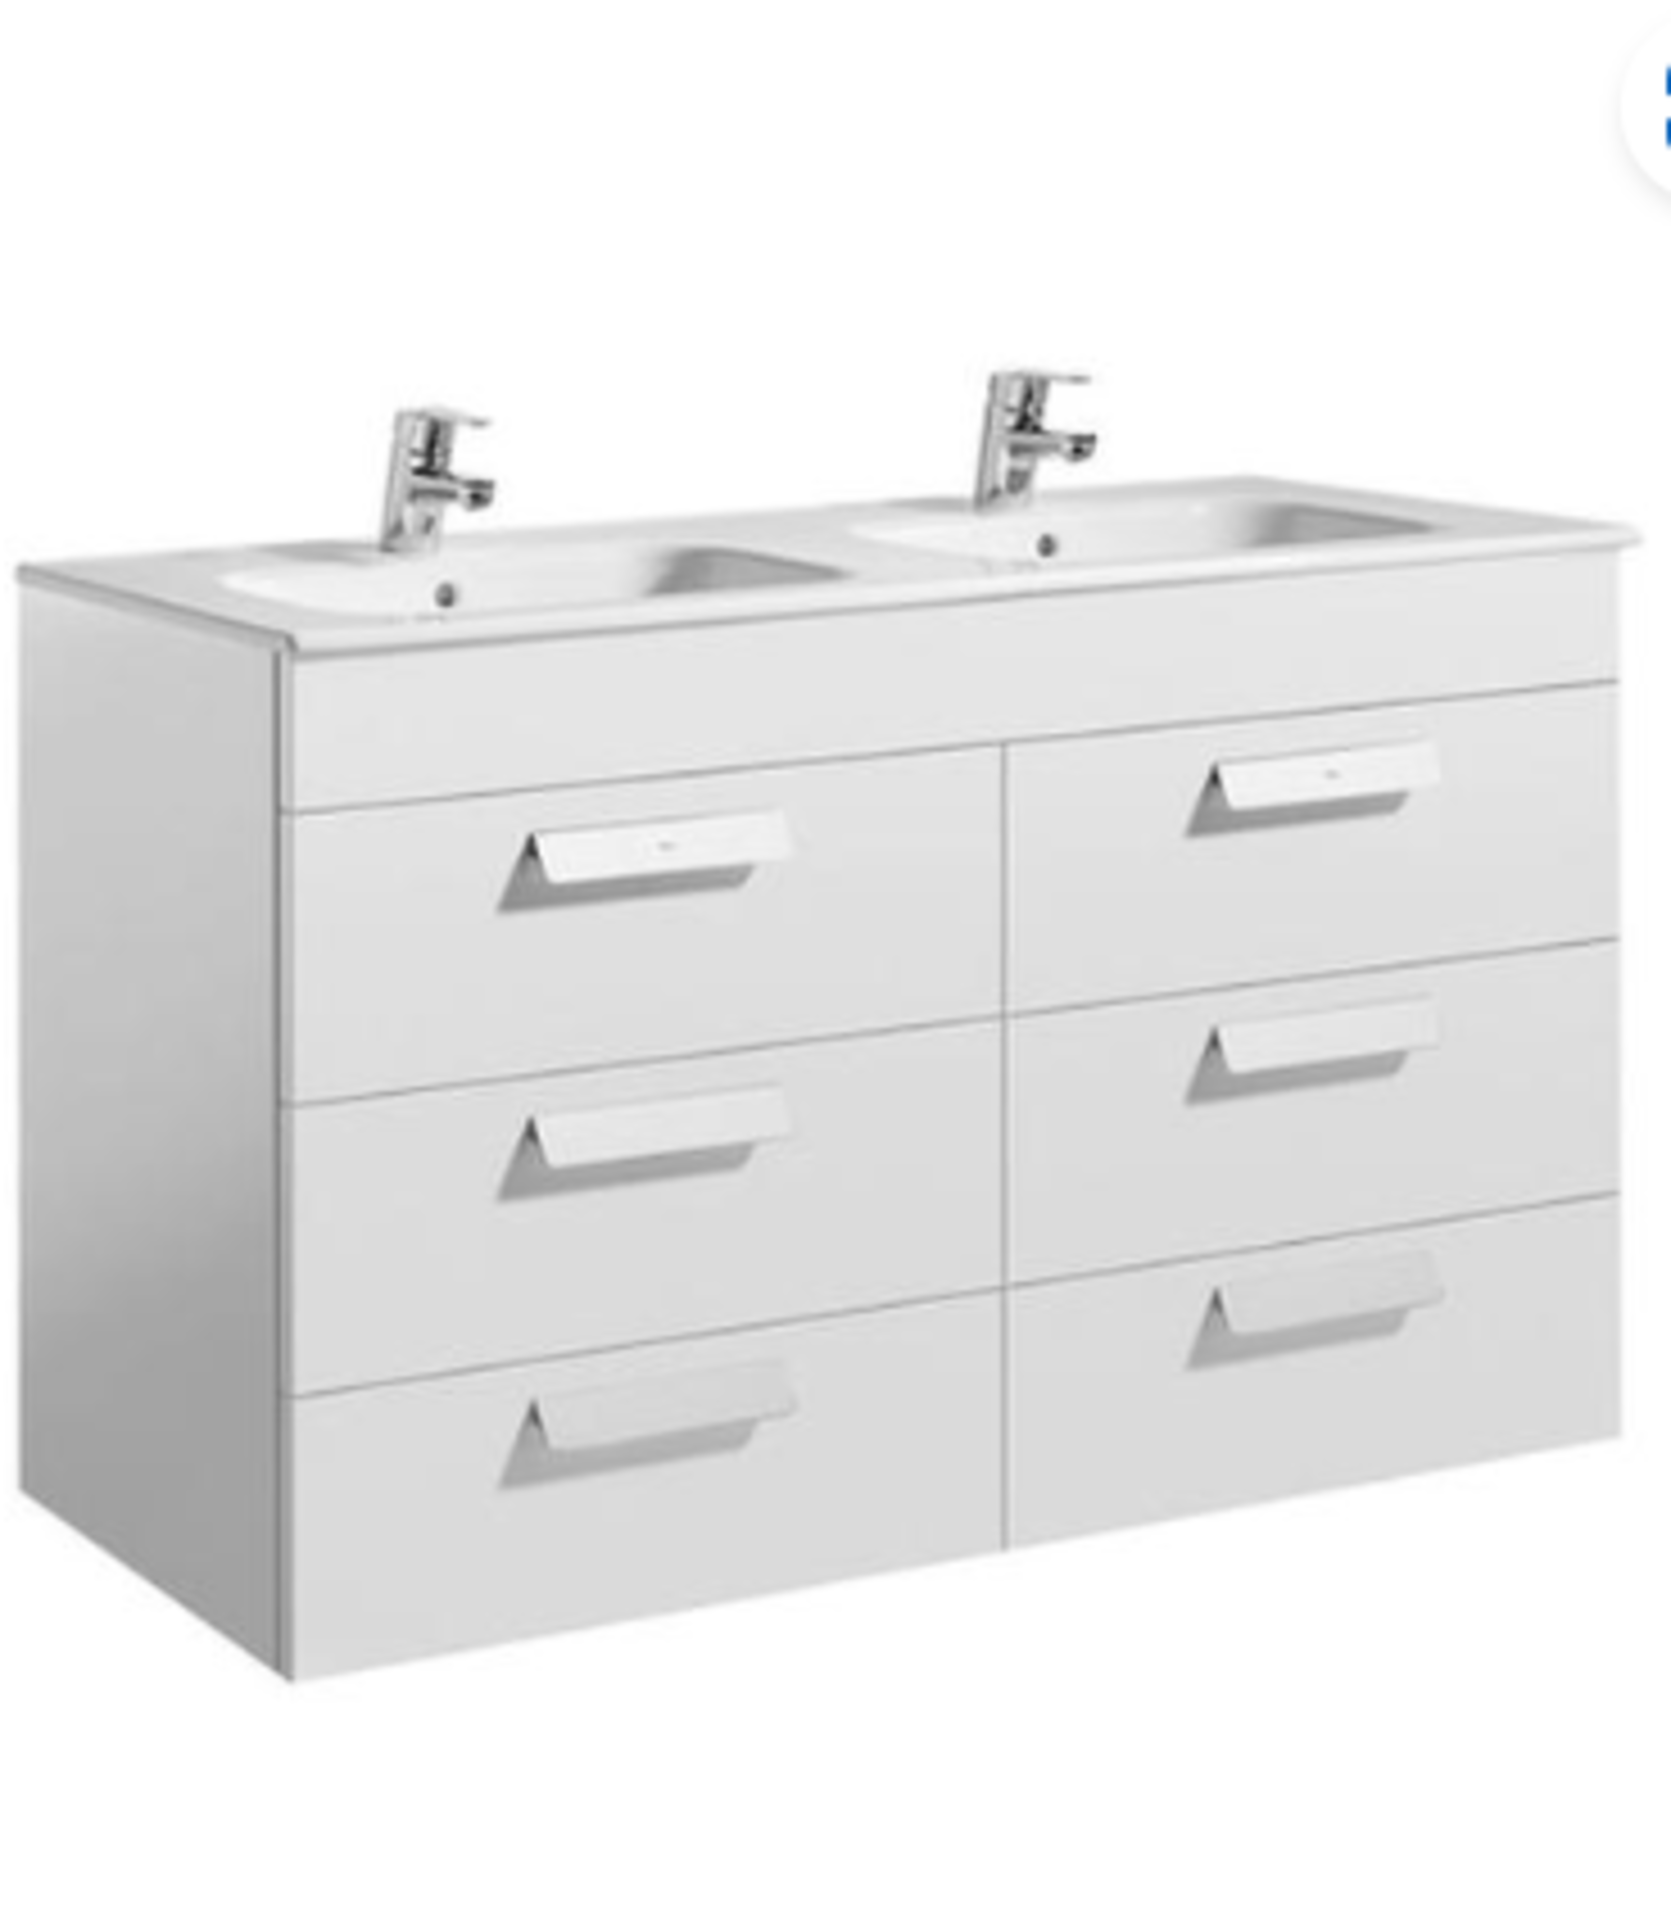 Roca - Debba 1200mm 6 Soft Close Drawer Basin Unit - Gloss White - A856837806 - New & Boxed. RRP ?